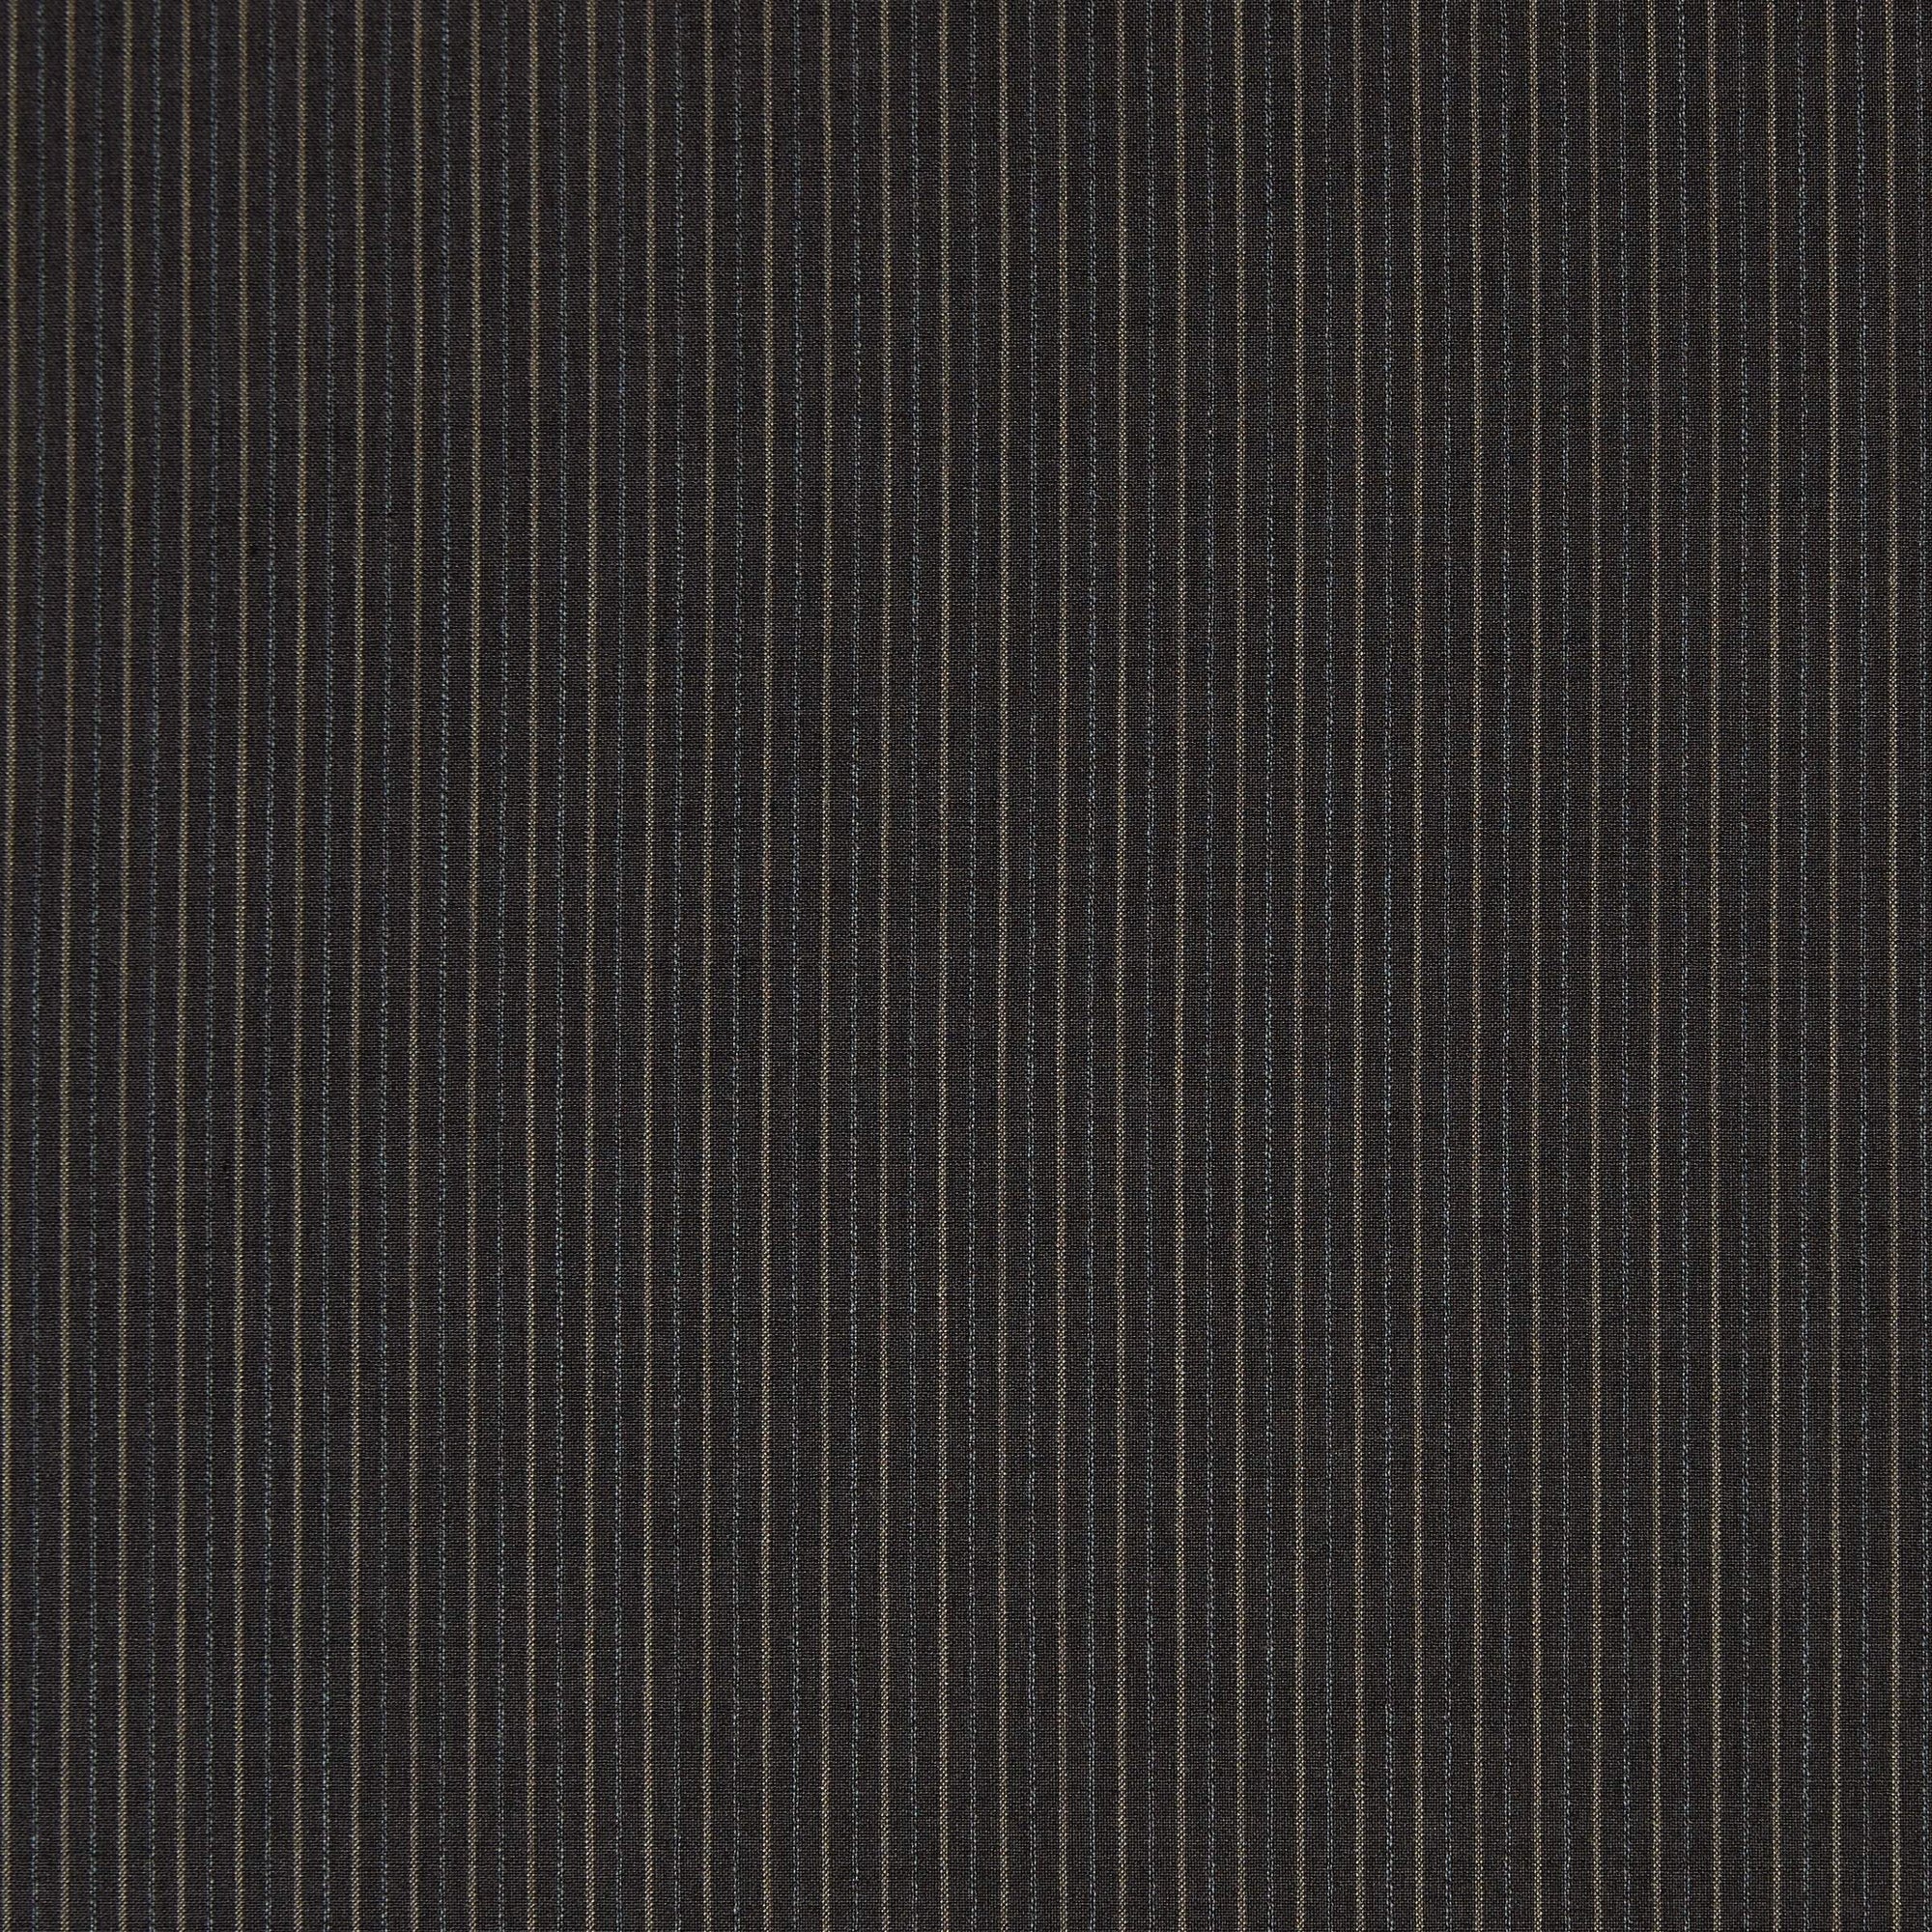 Displaying monza in the  charcoal colored Pin striped mid weight wool, polyester and rayon blend suitable for clothing and furnishings